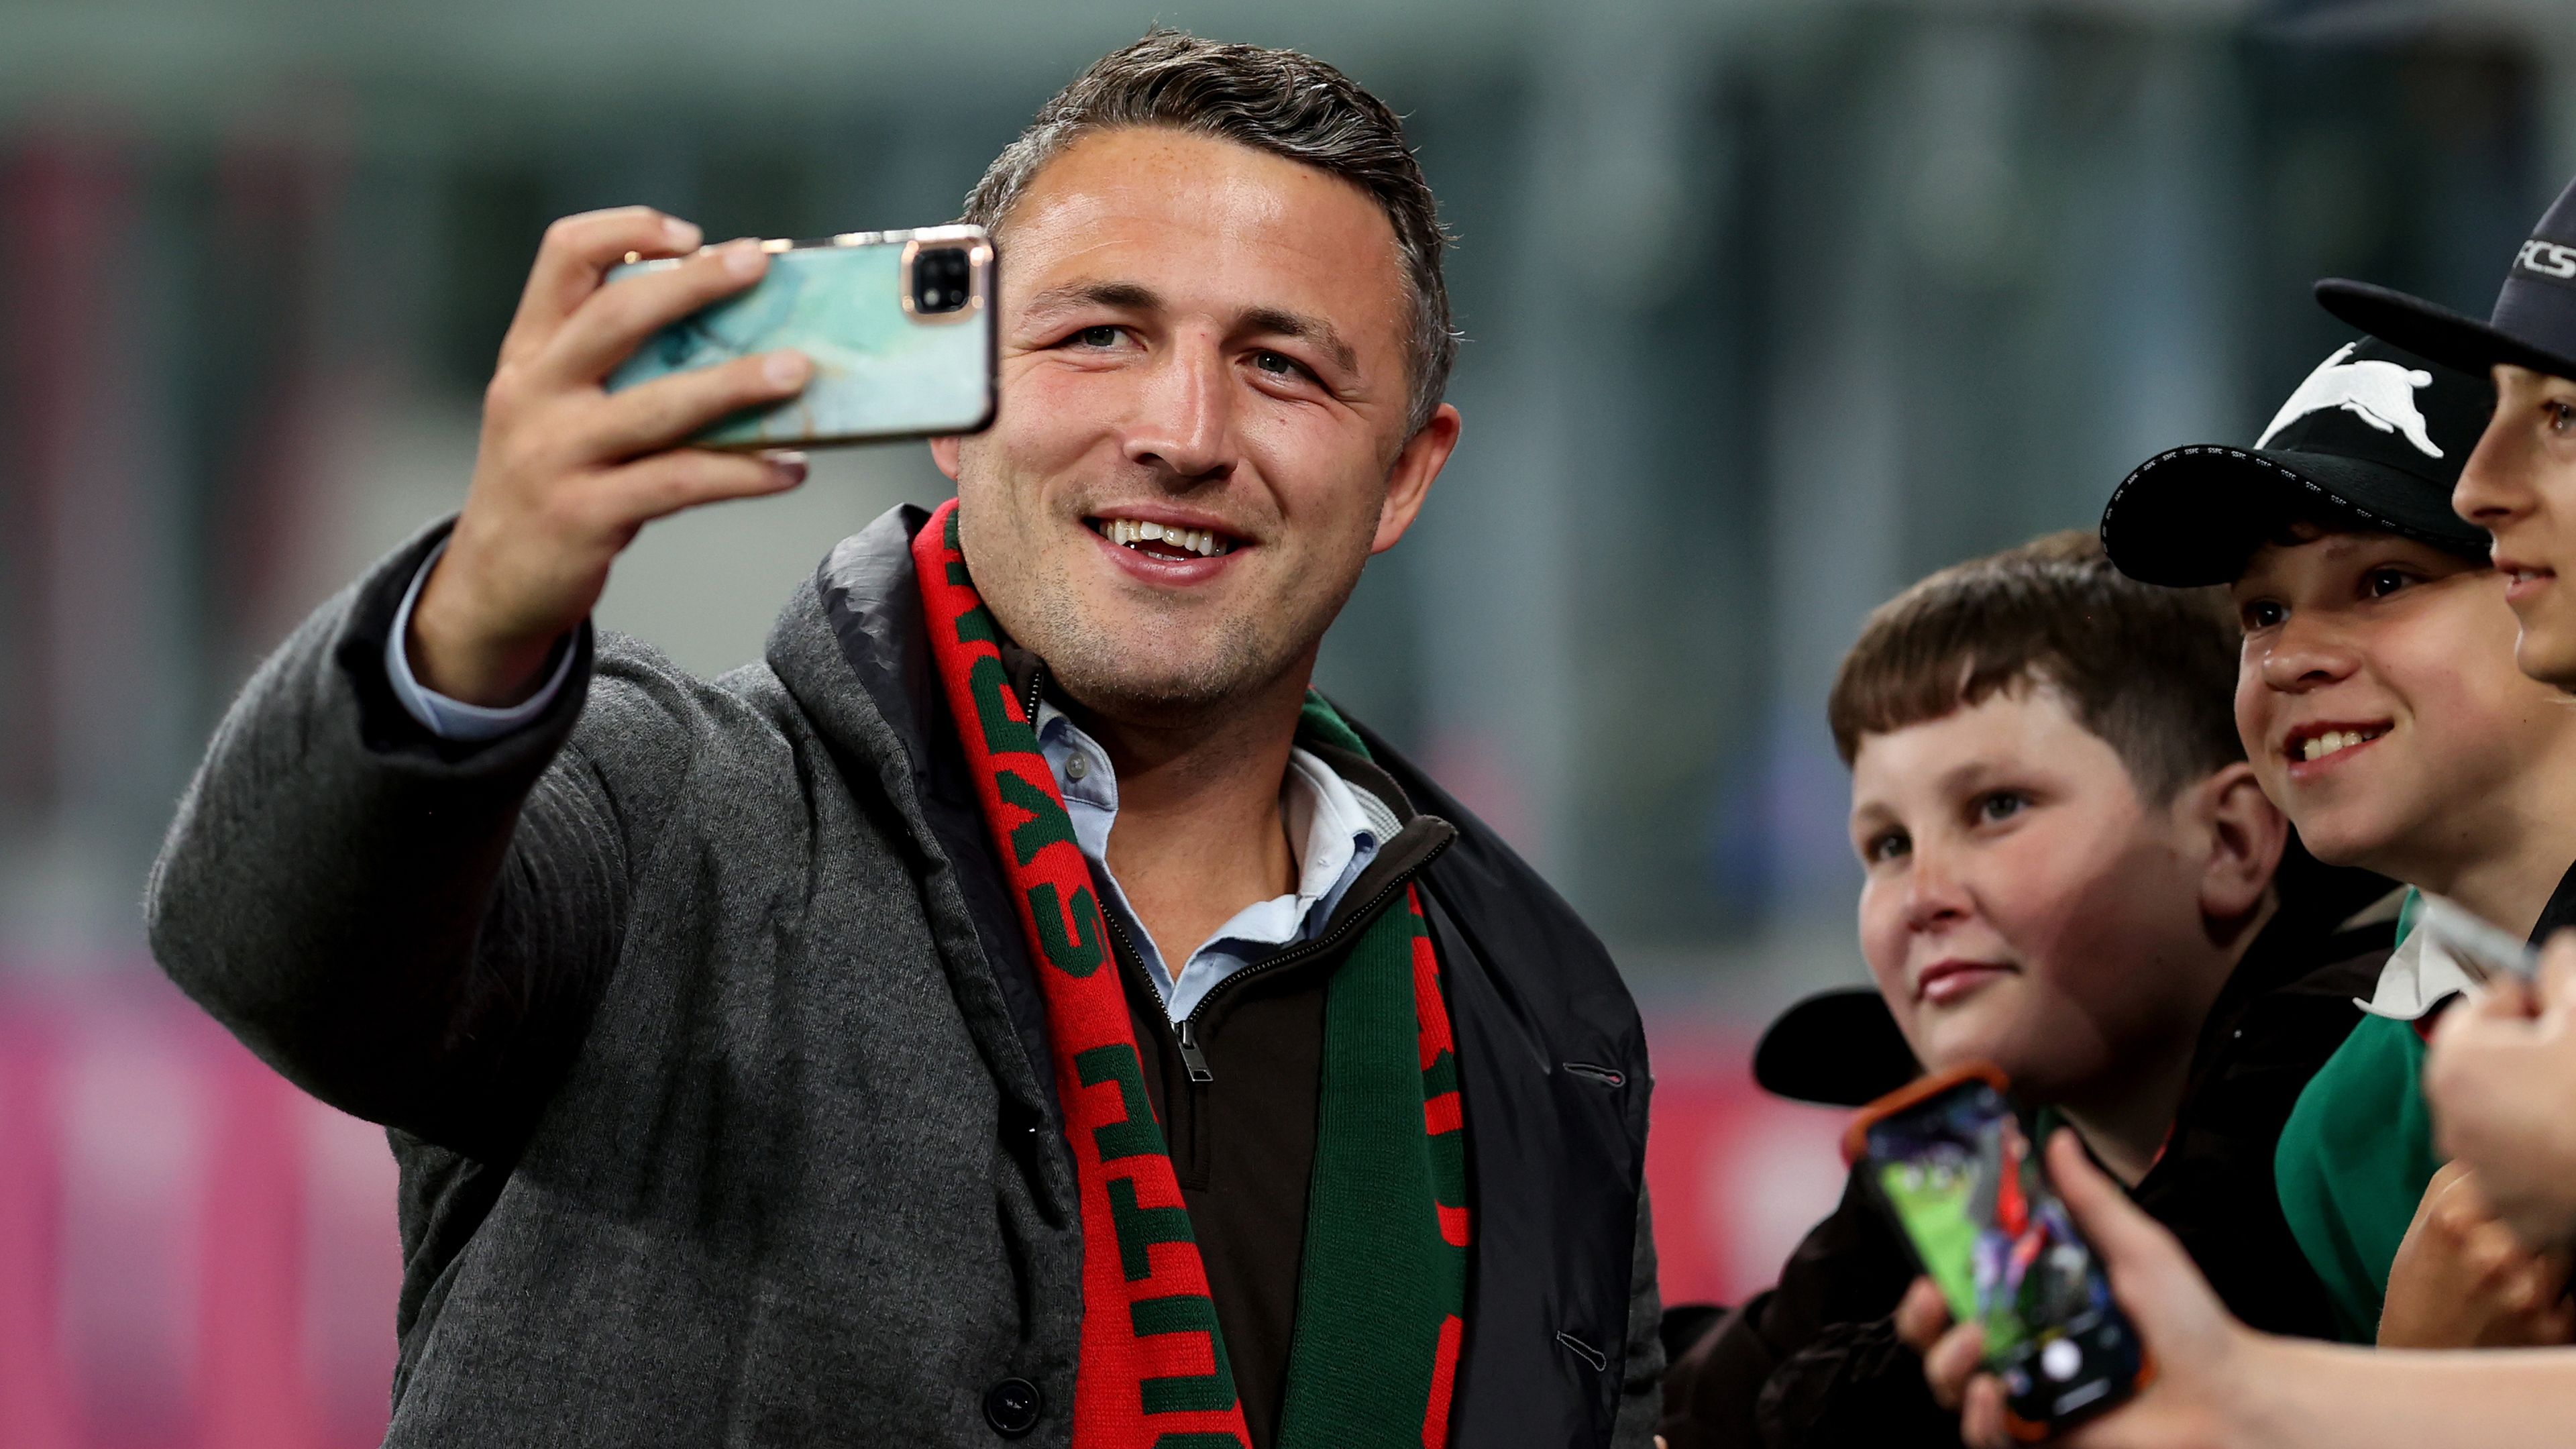 The Mole: Rabbitohs fan says Sam Burgess 'saved my life' after suffering medical episode